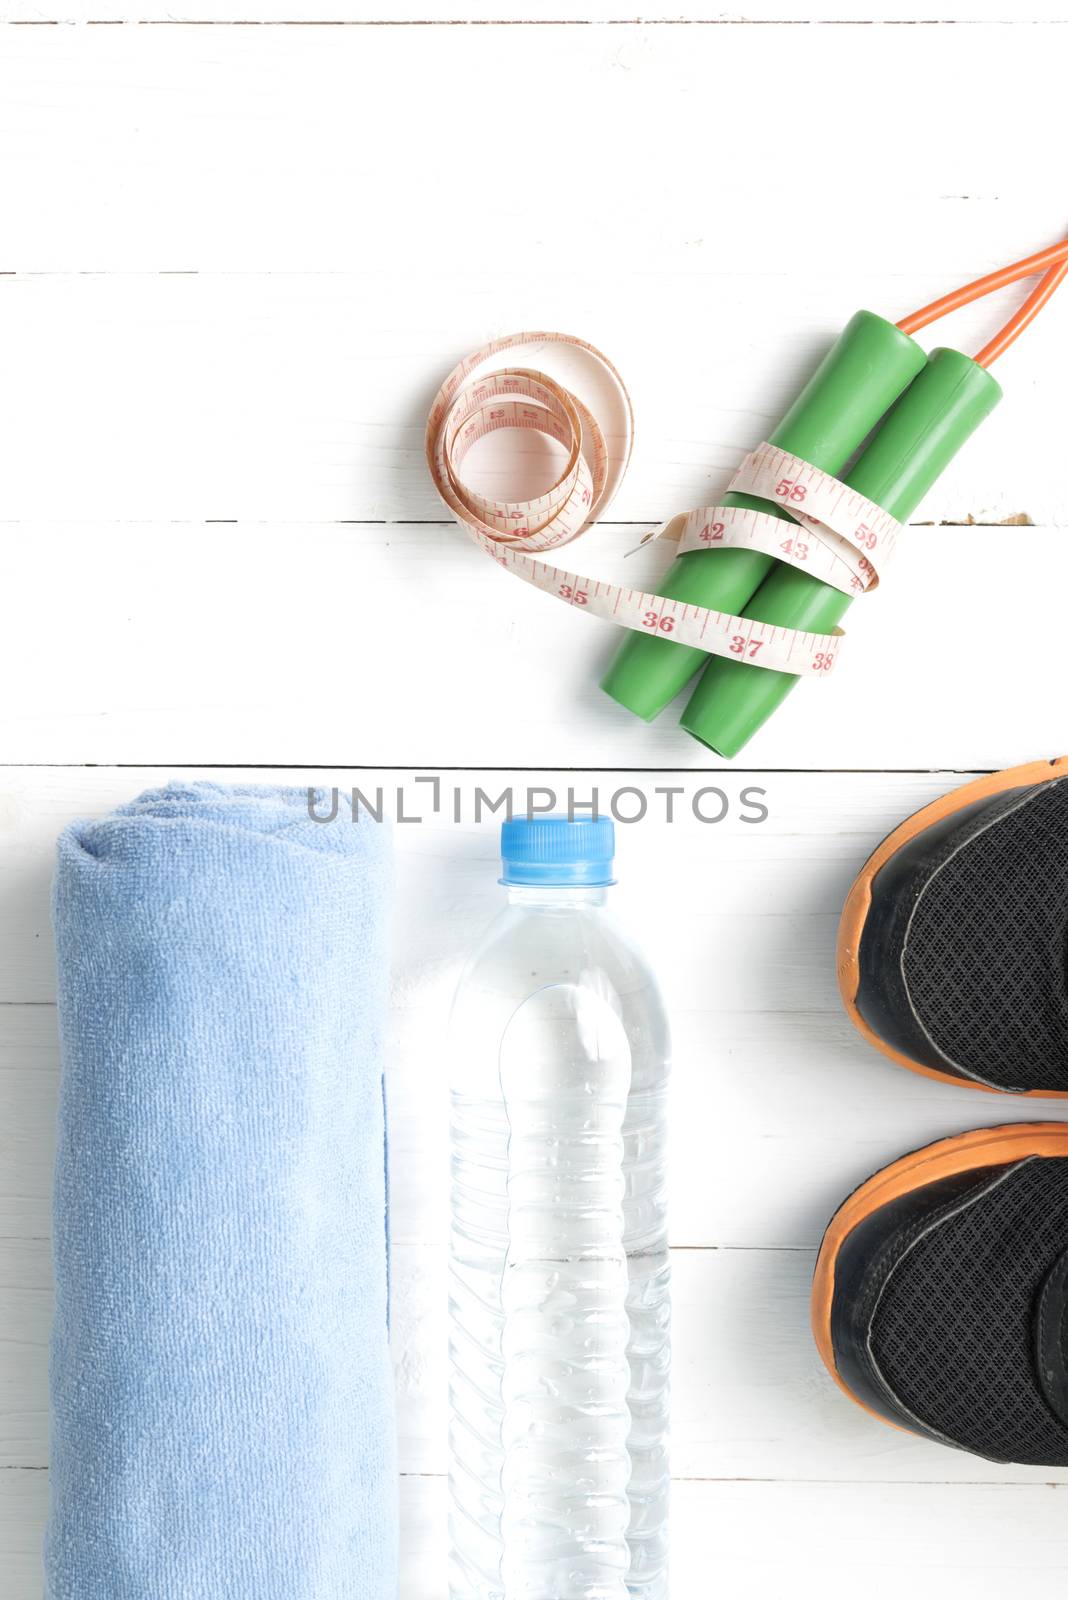 fitness equipment : running shoes,towel,jumping rope,water bottle and measuring tape on white wood table